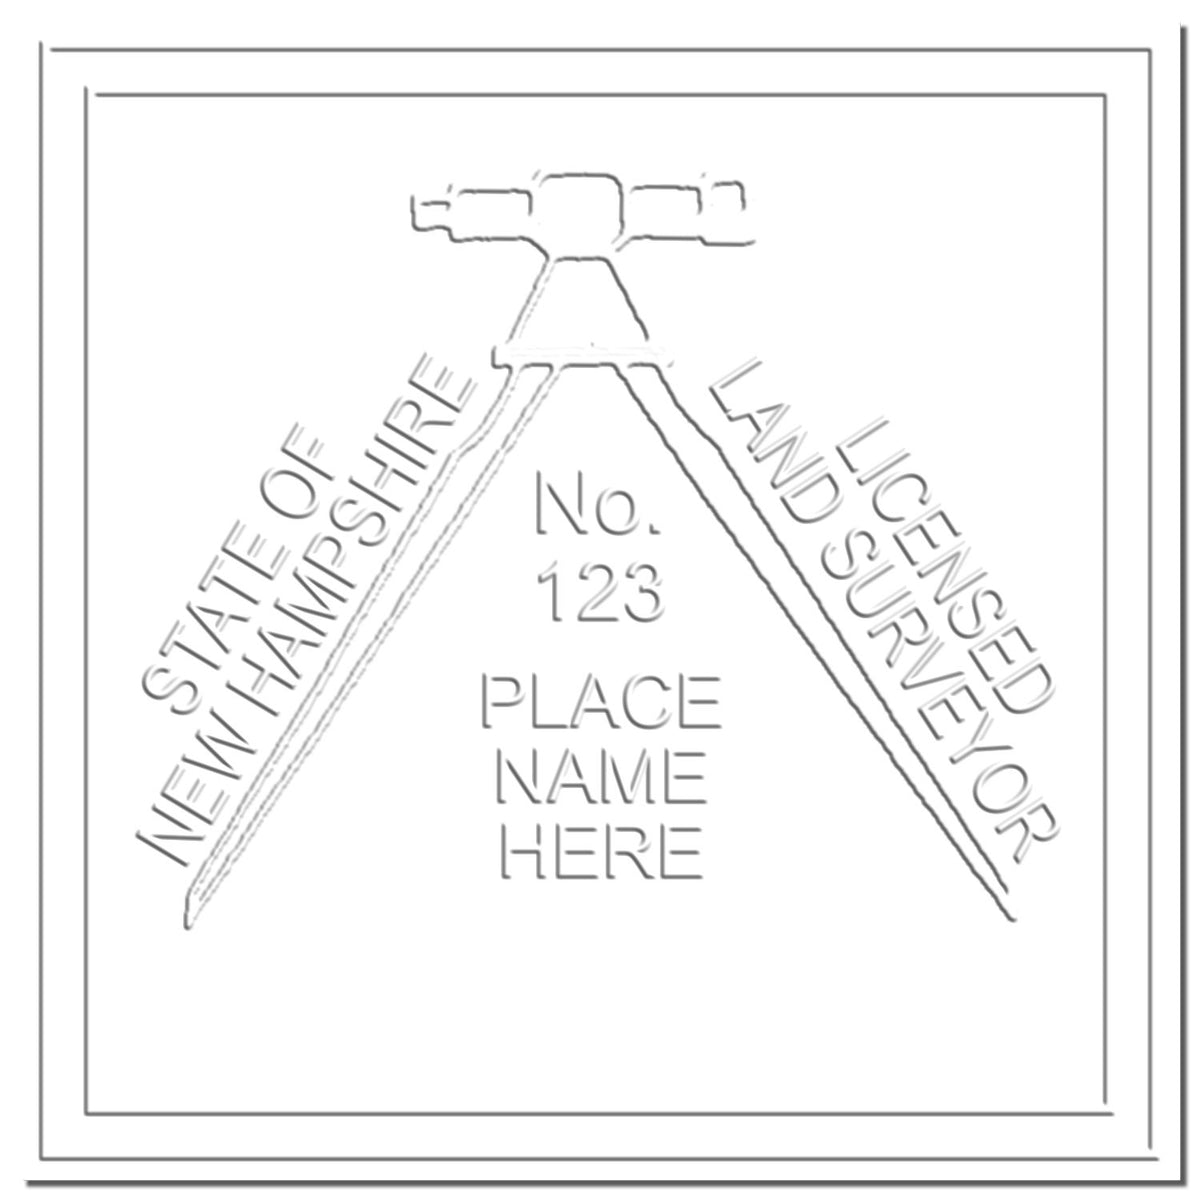 This paper is stamped with a sample imprint of the Hybrid New Hampshire Land Surveyor Seal, signifying its quality and reliability.